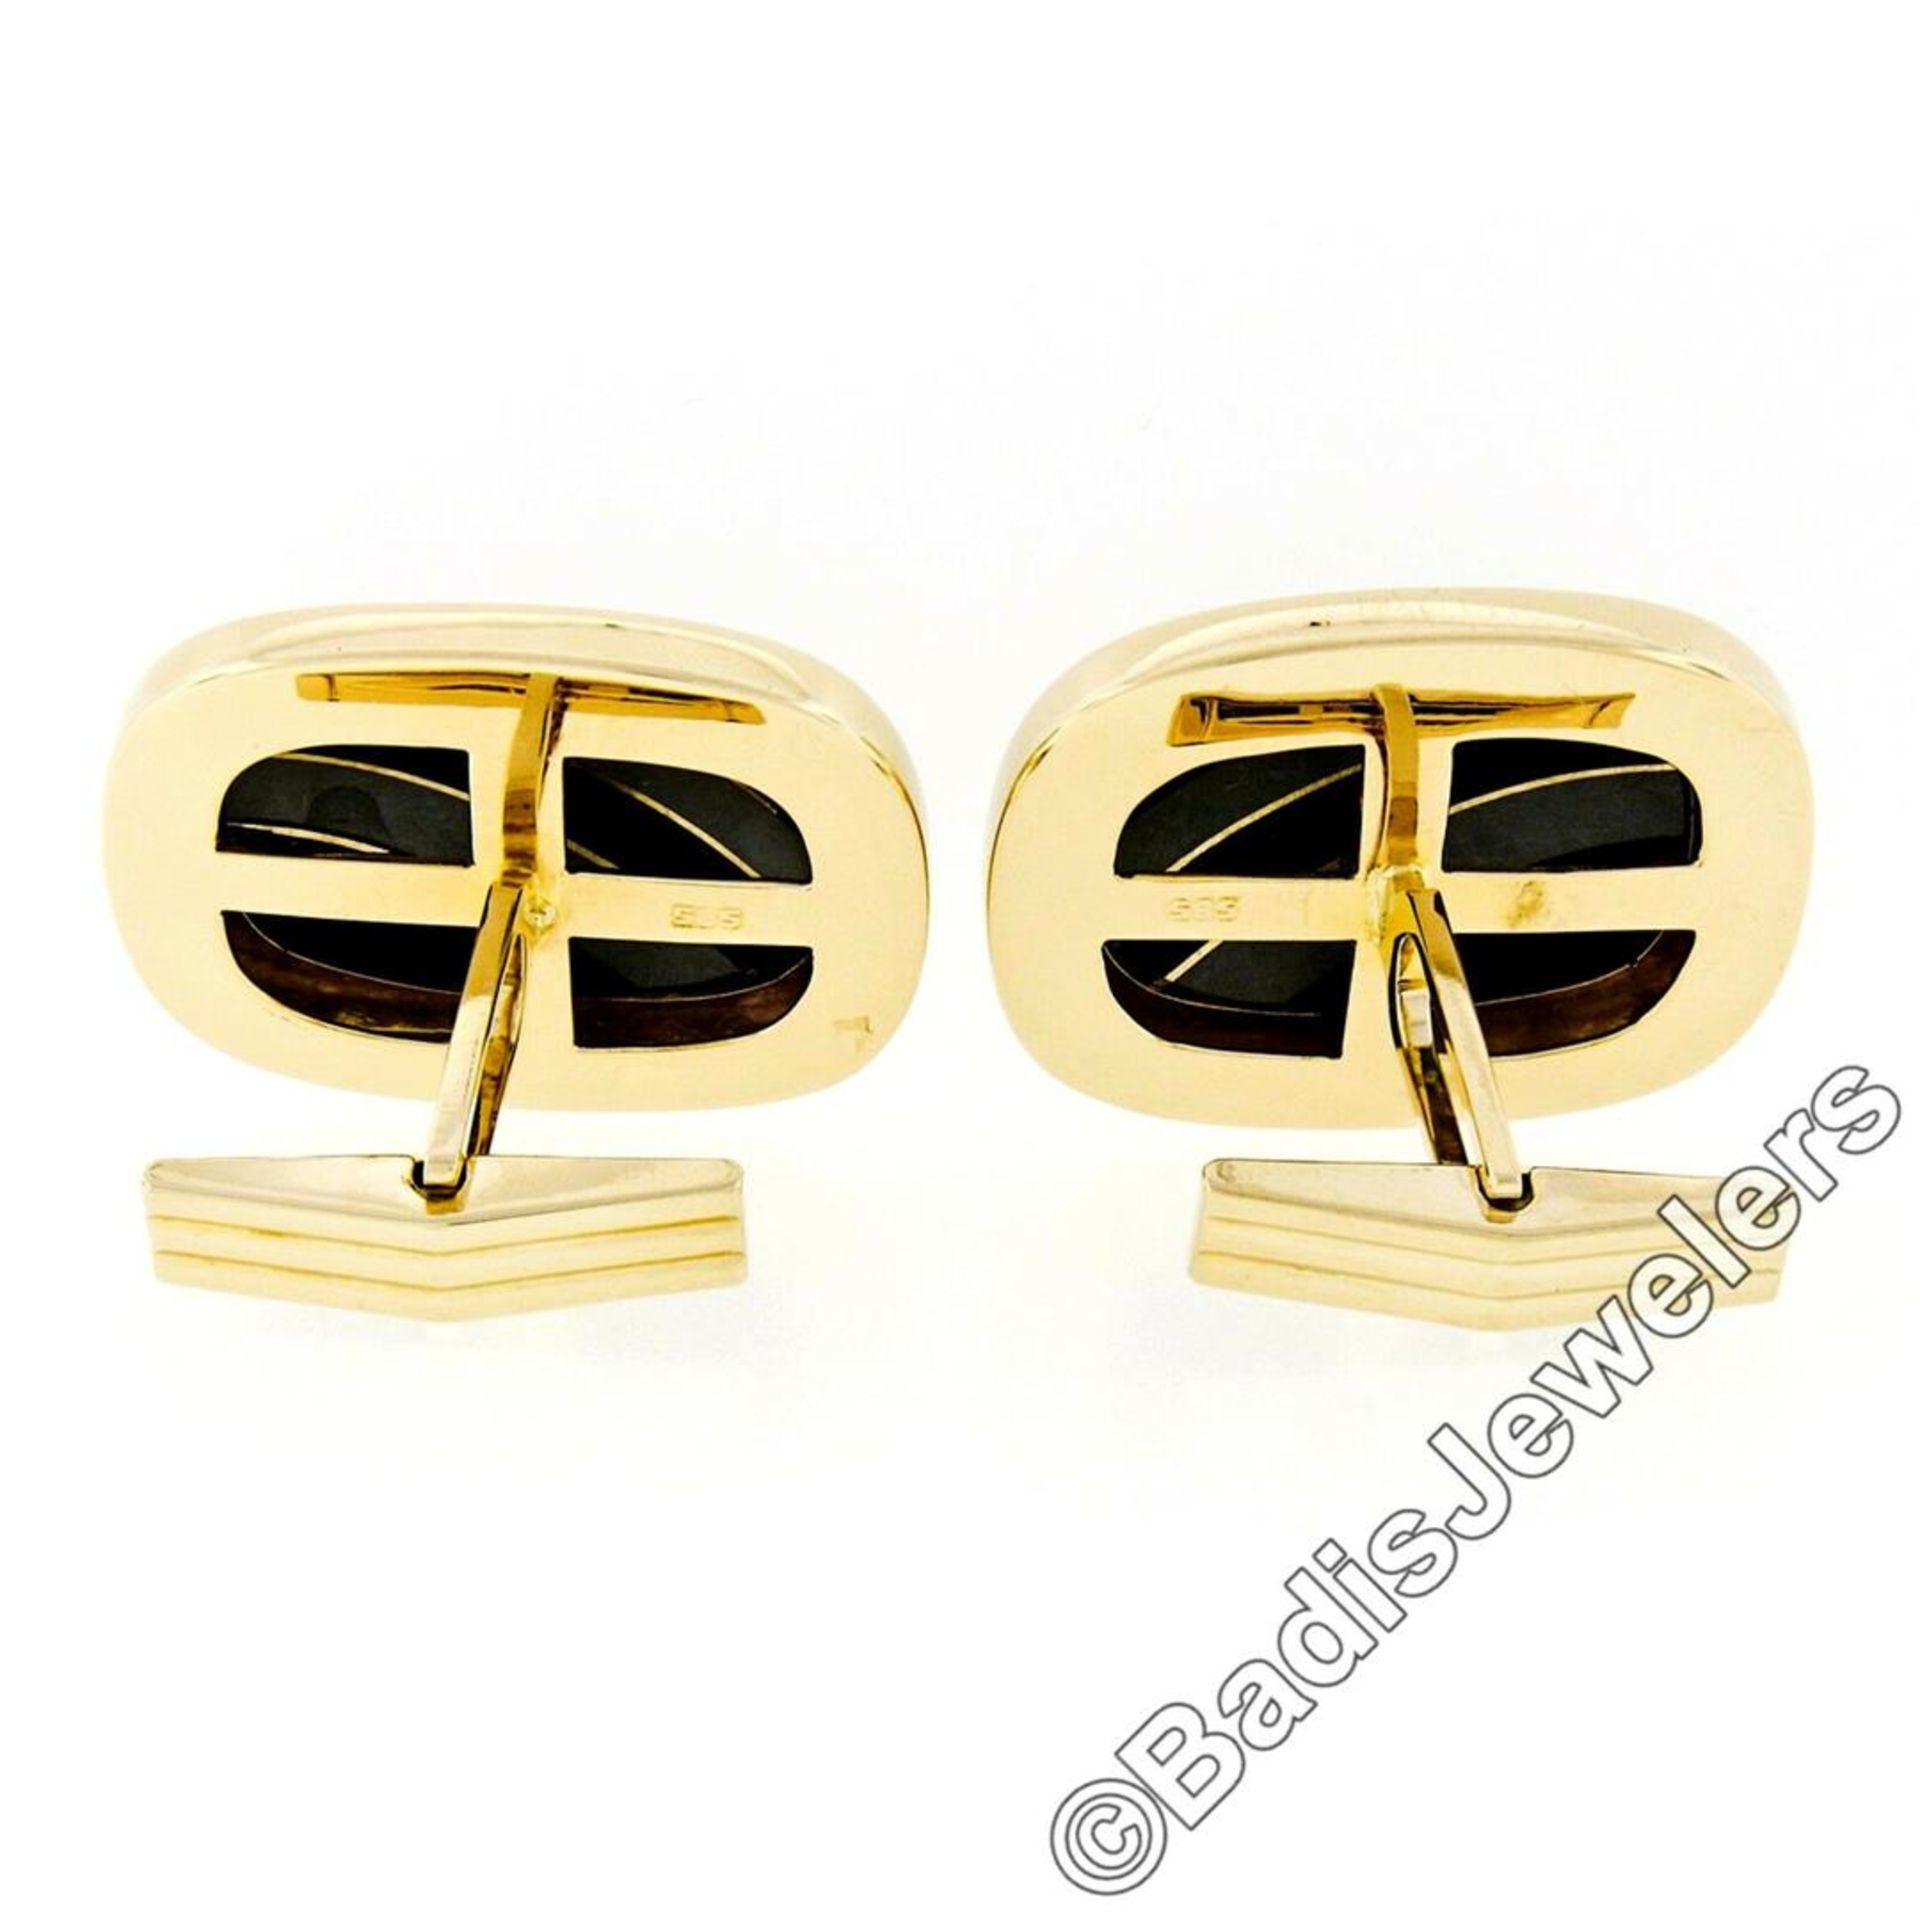 Vintage 14kt Yellow Gold Swivel Cuff Links w/ Hematite Inlaid in Black Onyx - Image 6 of 6